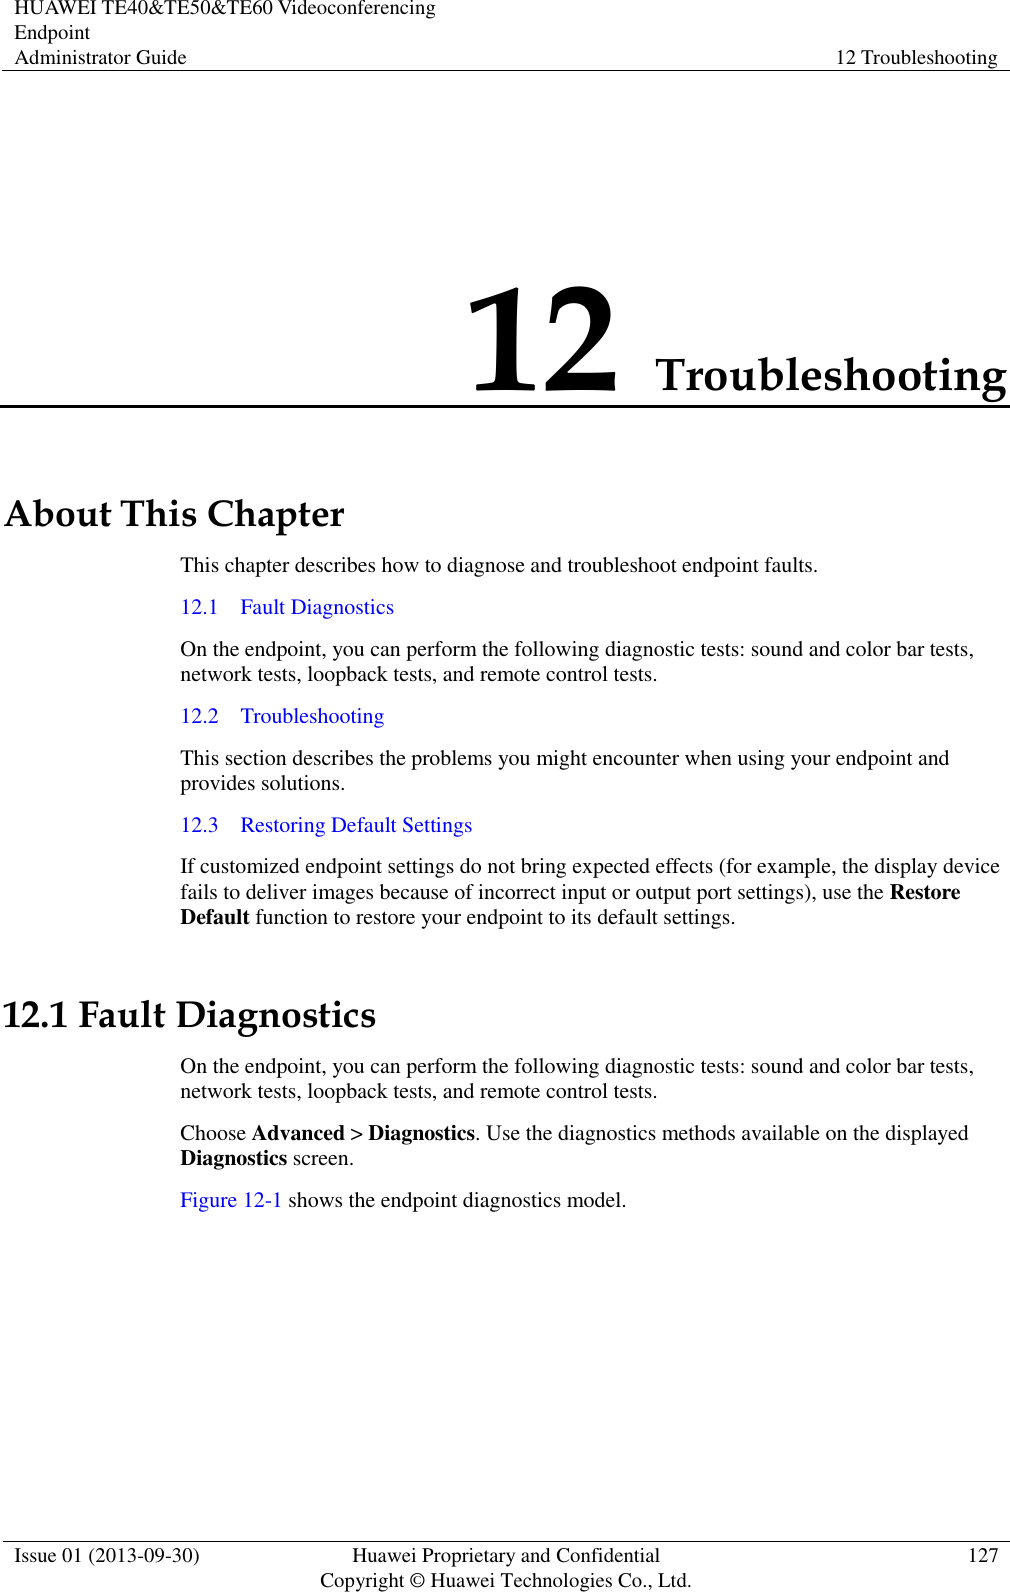 HUAWEI TE40&amp;TE50&amp;TE60 Videoconferencing Endpoint Administrator Guide 12 Troubleshooting  Issue 01 (2013-09-30) Huawei Proprietary and Confidential                                     Copyright © Huawei Technologies Co., Ltd. 127  12 Troubleshooting About This Chapter This chapter describes how to diagnose and troubleshoot endpoint faults. 12.1    Fault Diagnostics On the endpoint, you can perform the following diagnostic tests: sound and color bar tests, network tests, loopback tests, and remote control tests. 12.2    Troubleshooting This section describes the problems you might encounter when using your endpoint and provides solutions. 12.3    Restoring Default Settings If customized endpoint settings do not bring expected effects (for example, the display device fails to deliver images because of incorrect input or output port settings), use the Restore Default function to restore your endpoint to its default settings. 12.1 Fault Diagnostics On the endpoint, you can perform the following diagnostic tests: sound and color bar tests, network tests, loopback tests, and remote control tests. Choose Advanced &gt; Diagnostics. Use the diagnostics methods available on the displayed Diagnostics screen. Figure 12-1 shows the endpoint diagnostics model. 